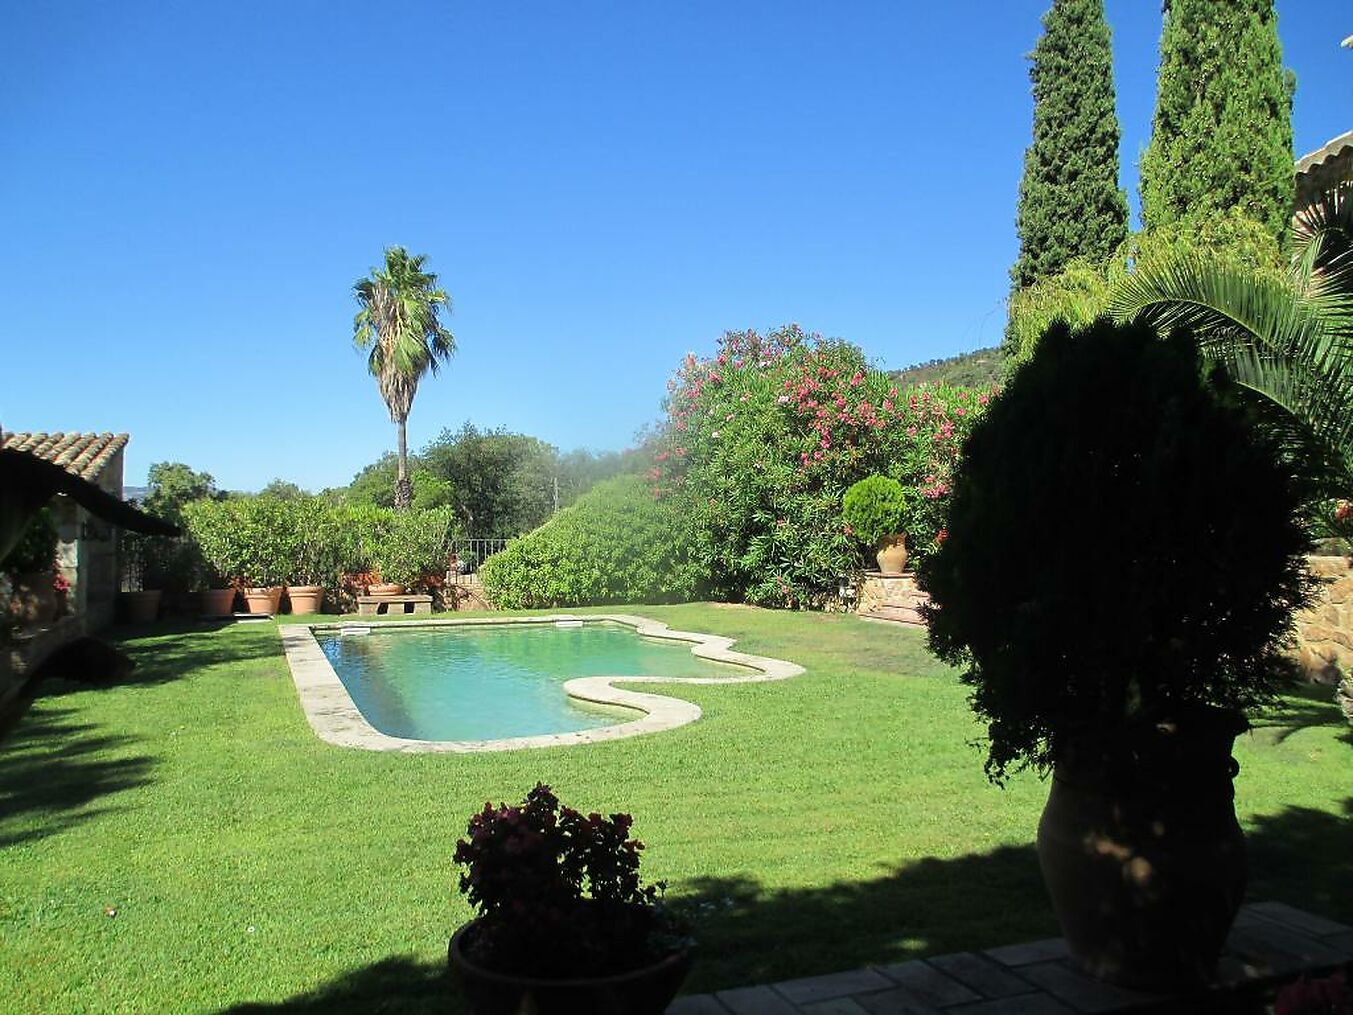 Masia-style property located in Playa de Aro, a short walk from the center and the beaches